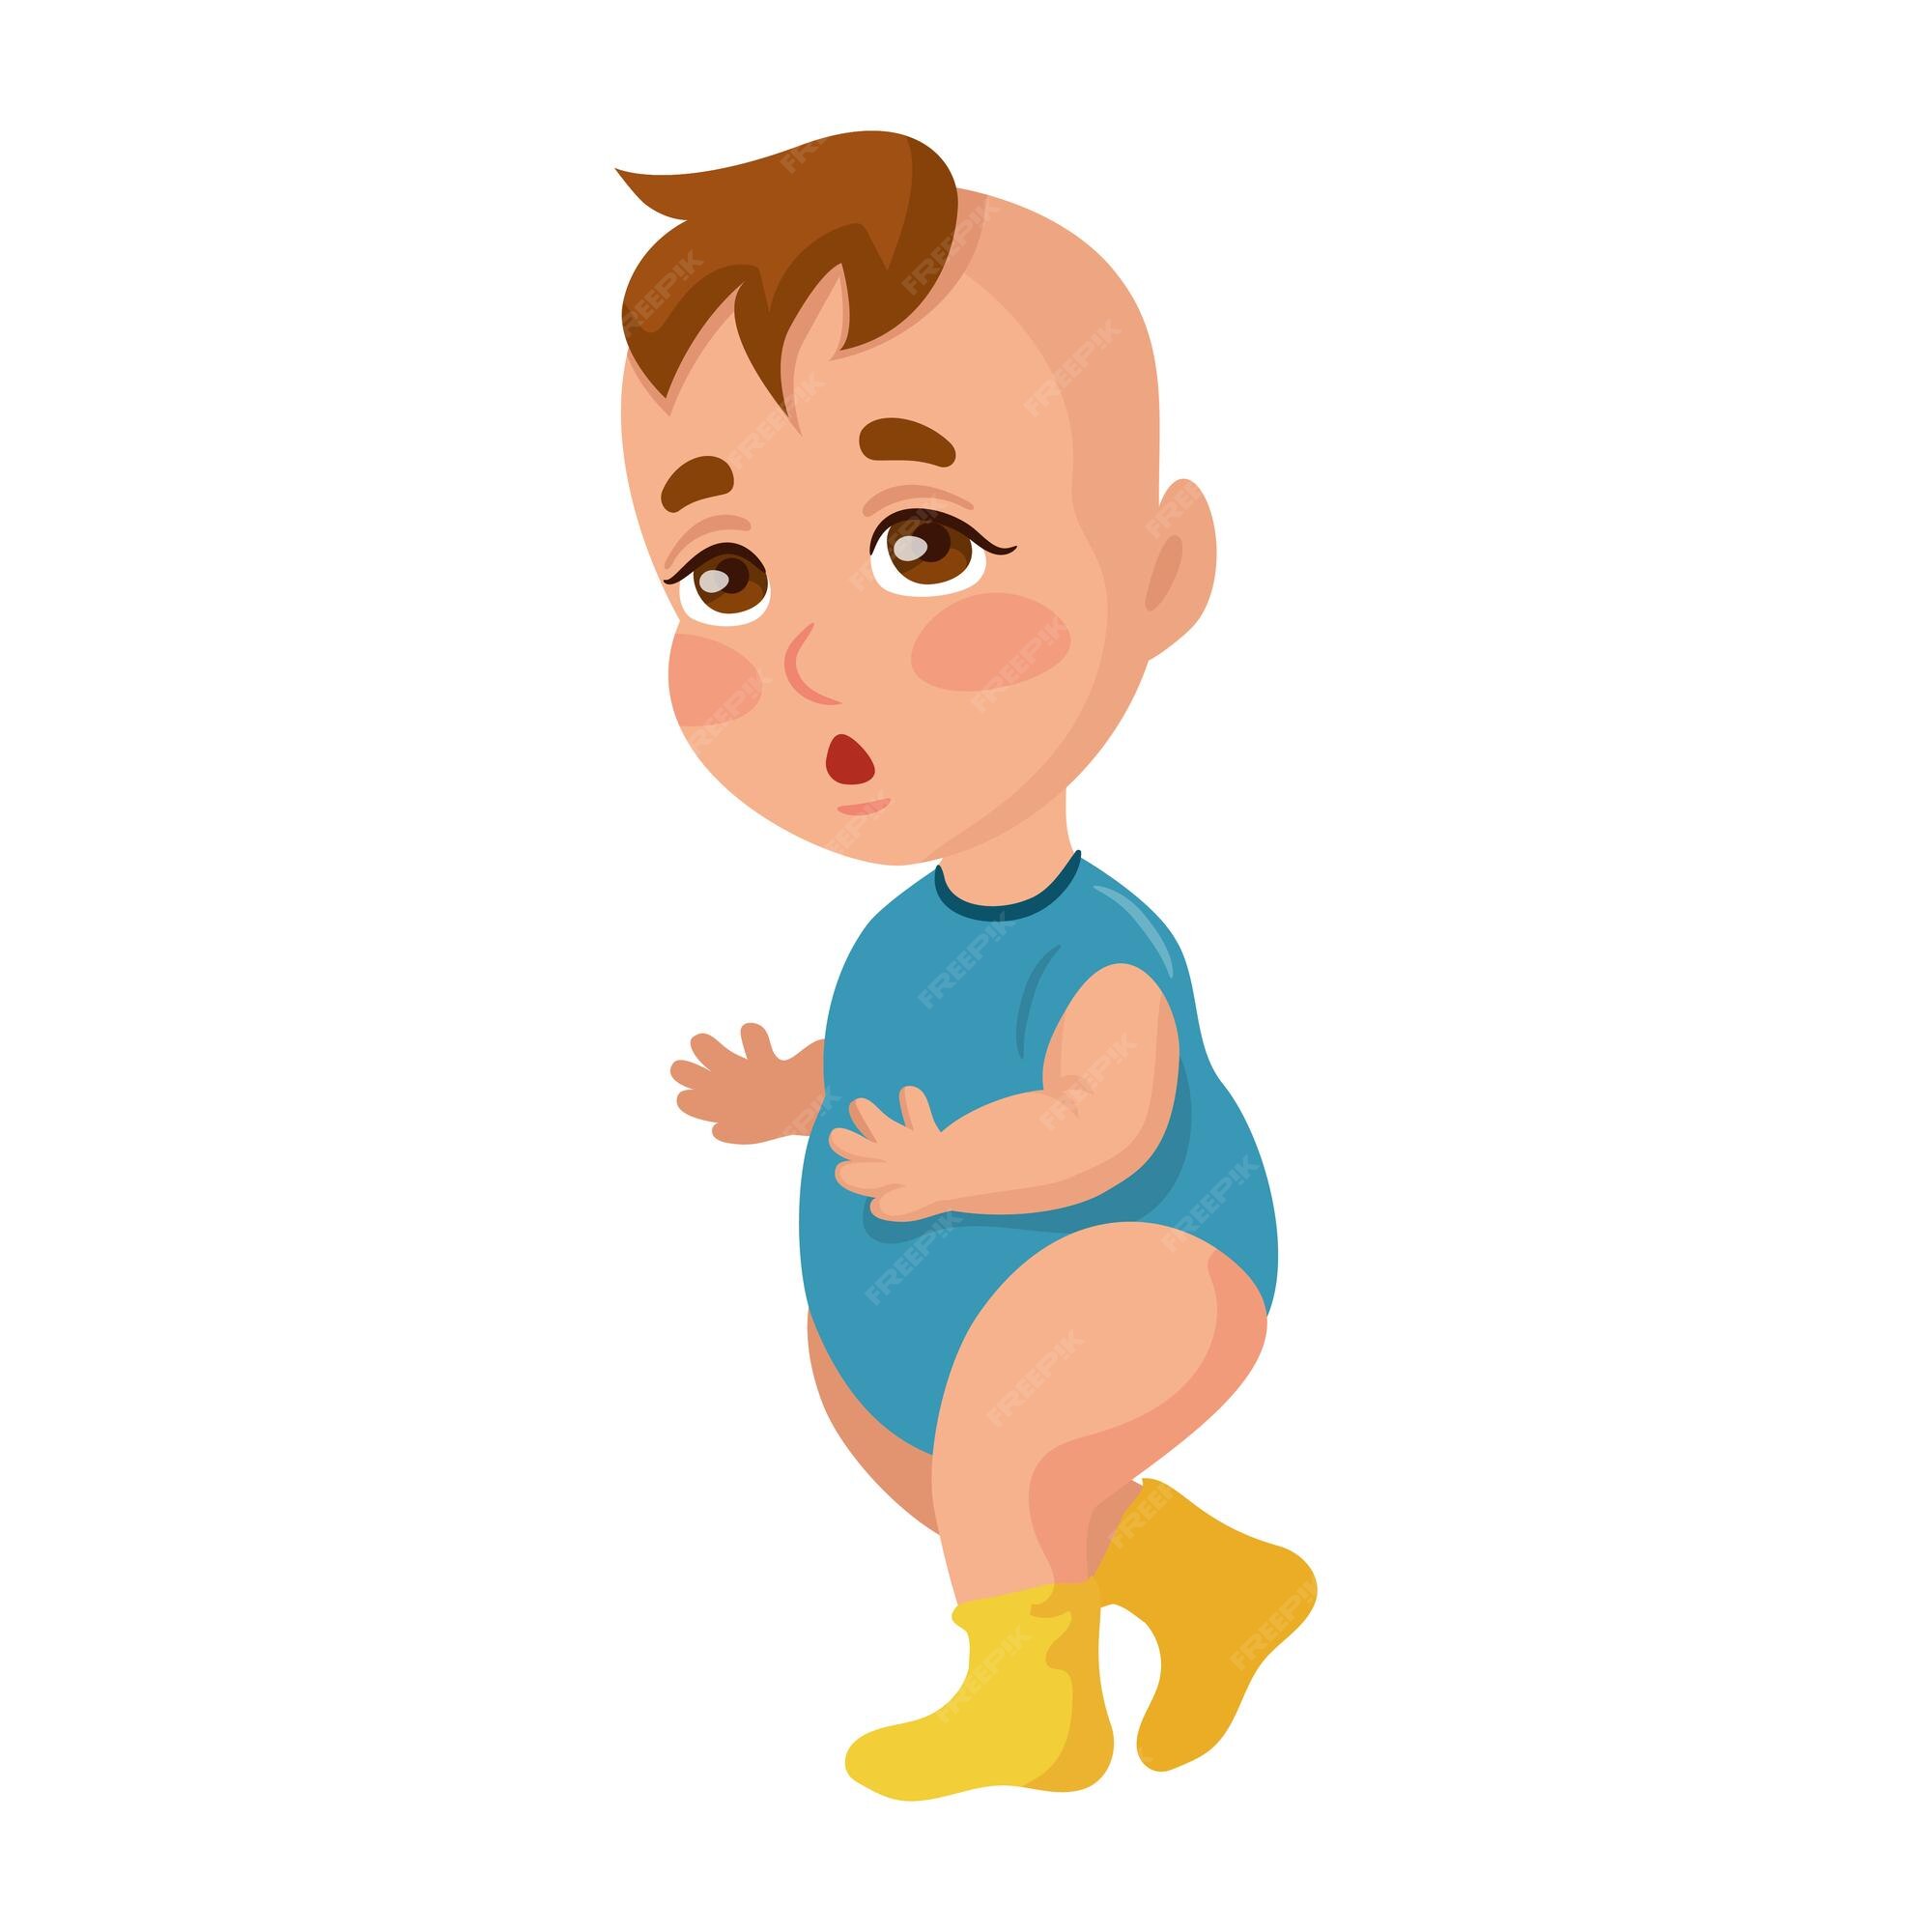 Premium Vector | Baby boy learning to walk isolate on white background  vector illustration